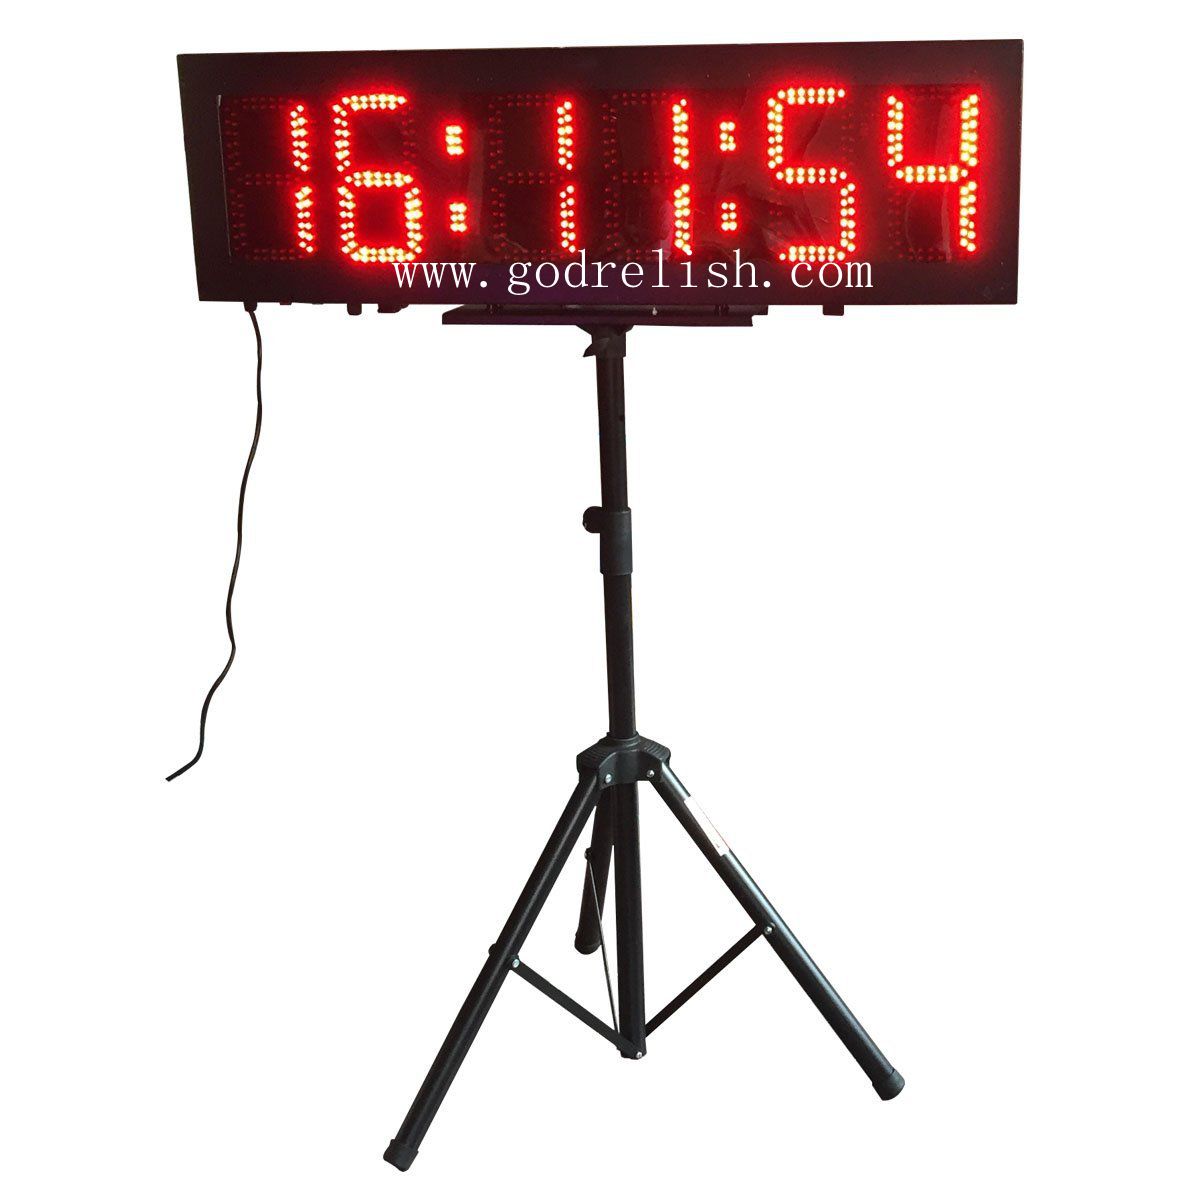 GODRELISH Double Sided LED Race Timing Clock Door Open Mantainence Design IP64 GODRELISH Cabinet 8